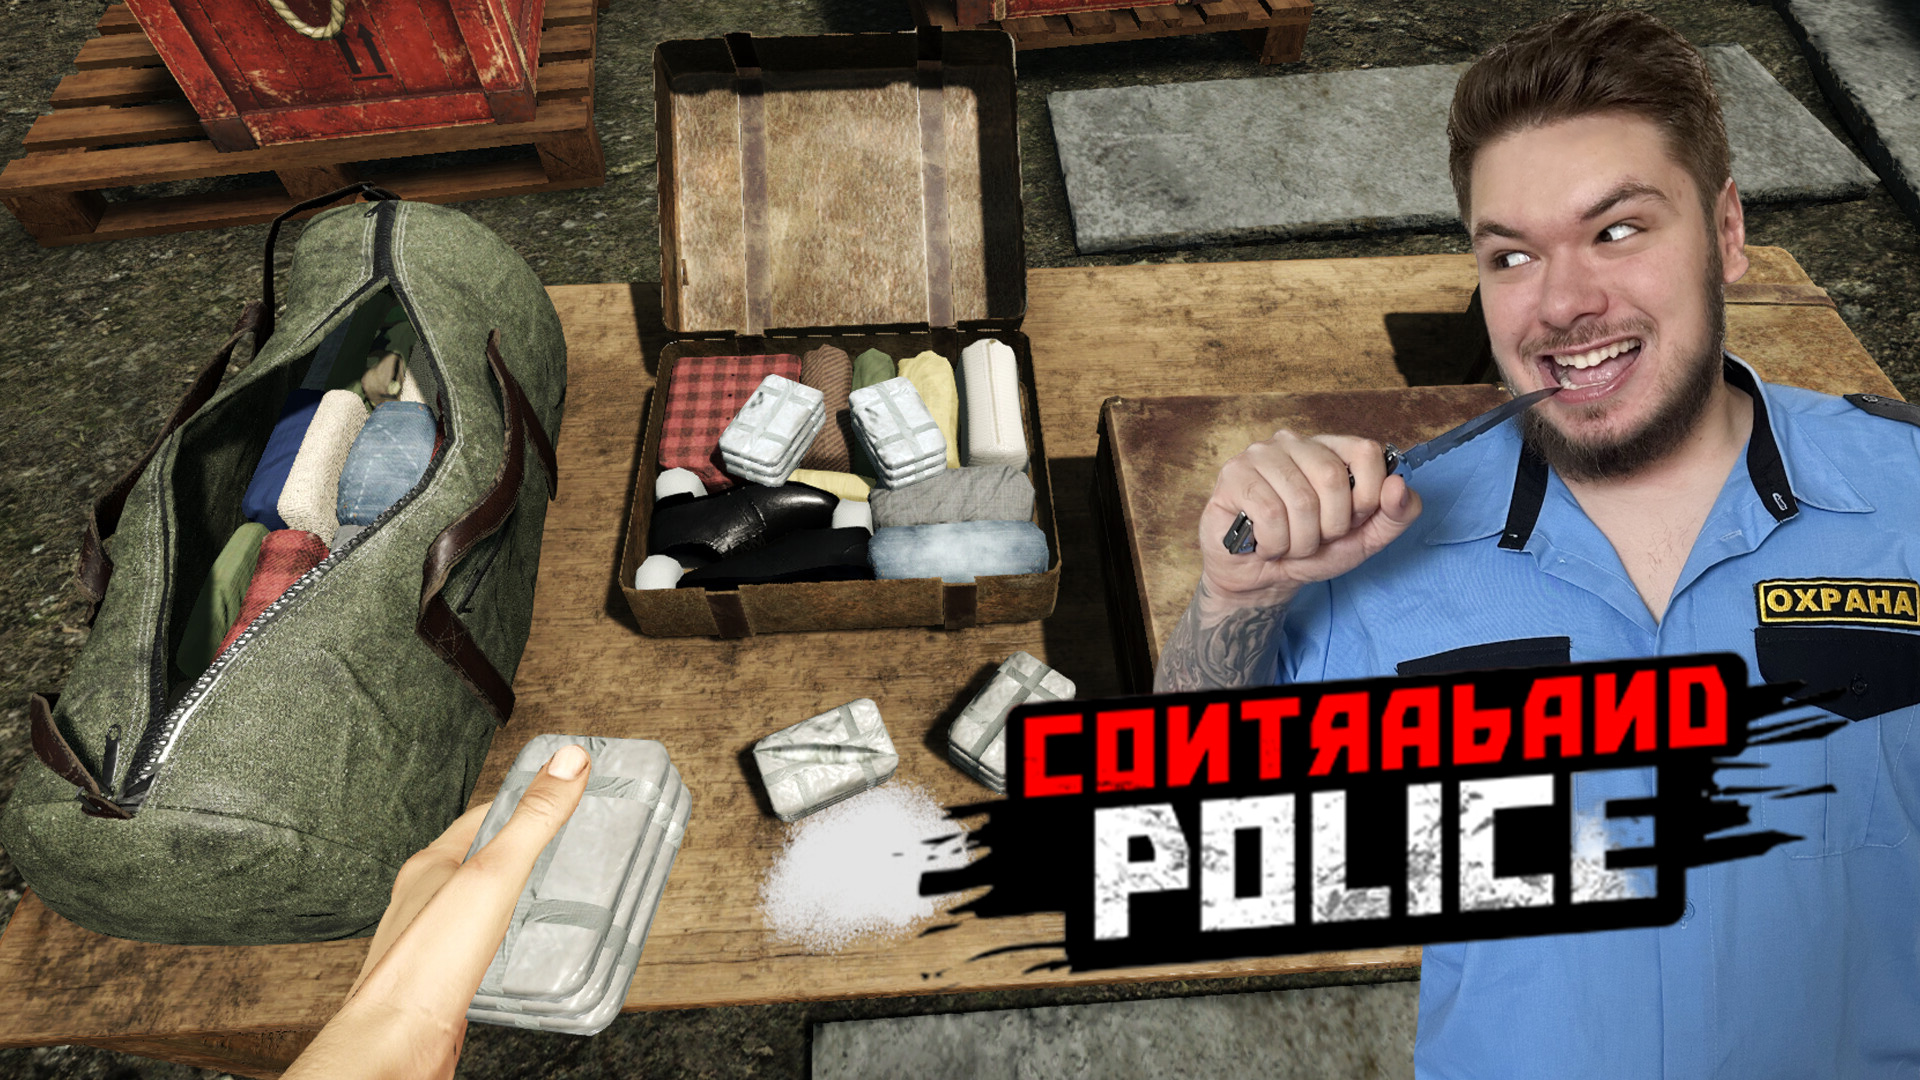 Contraband police steam фото 81